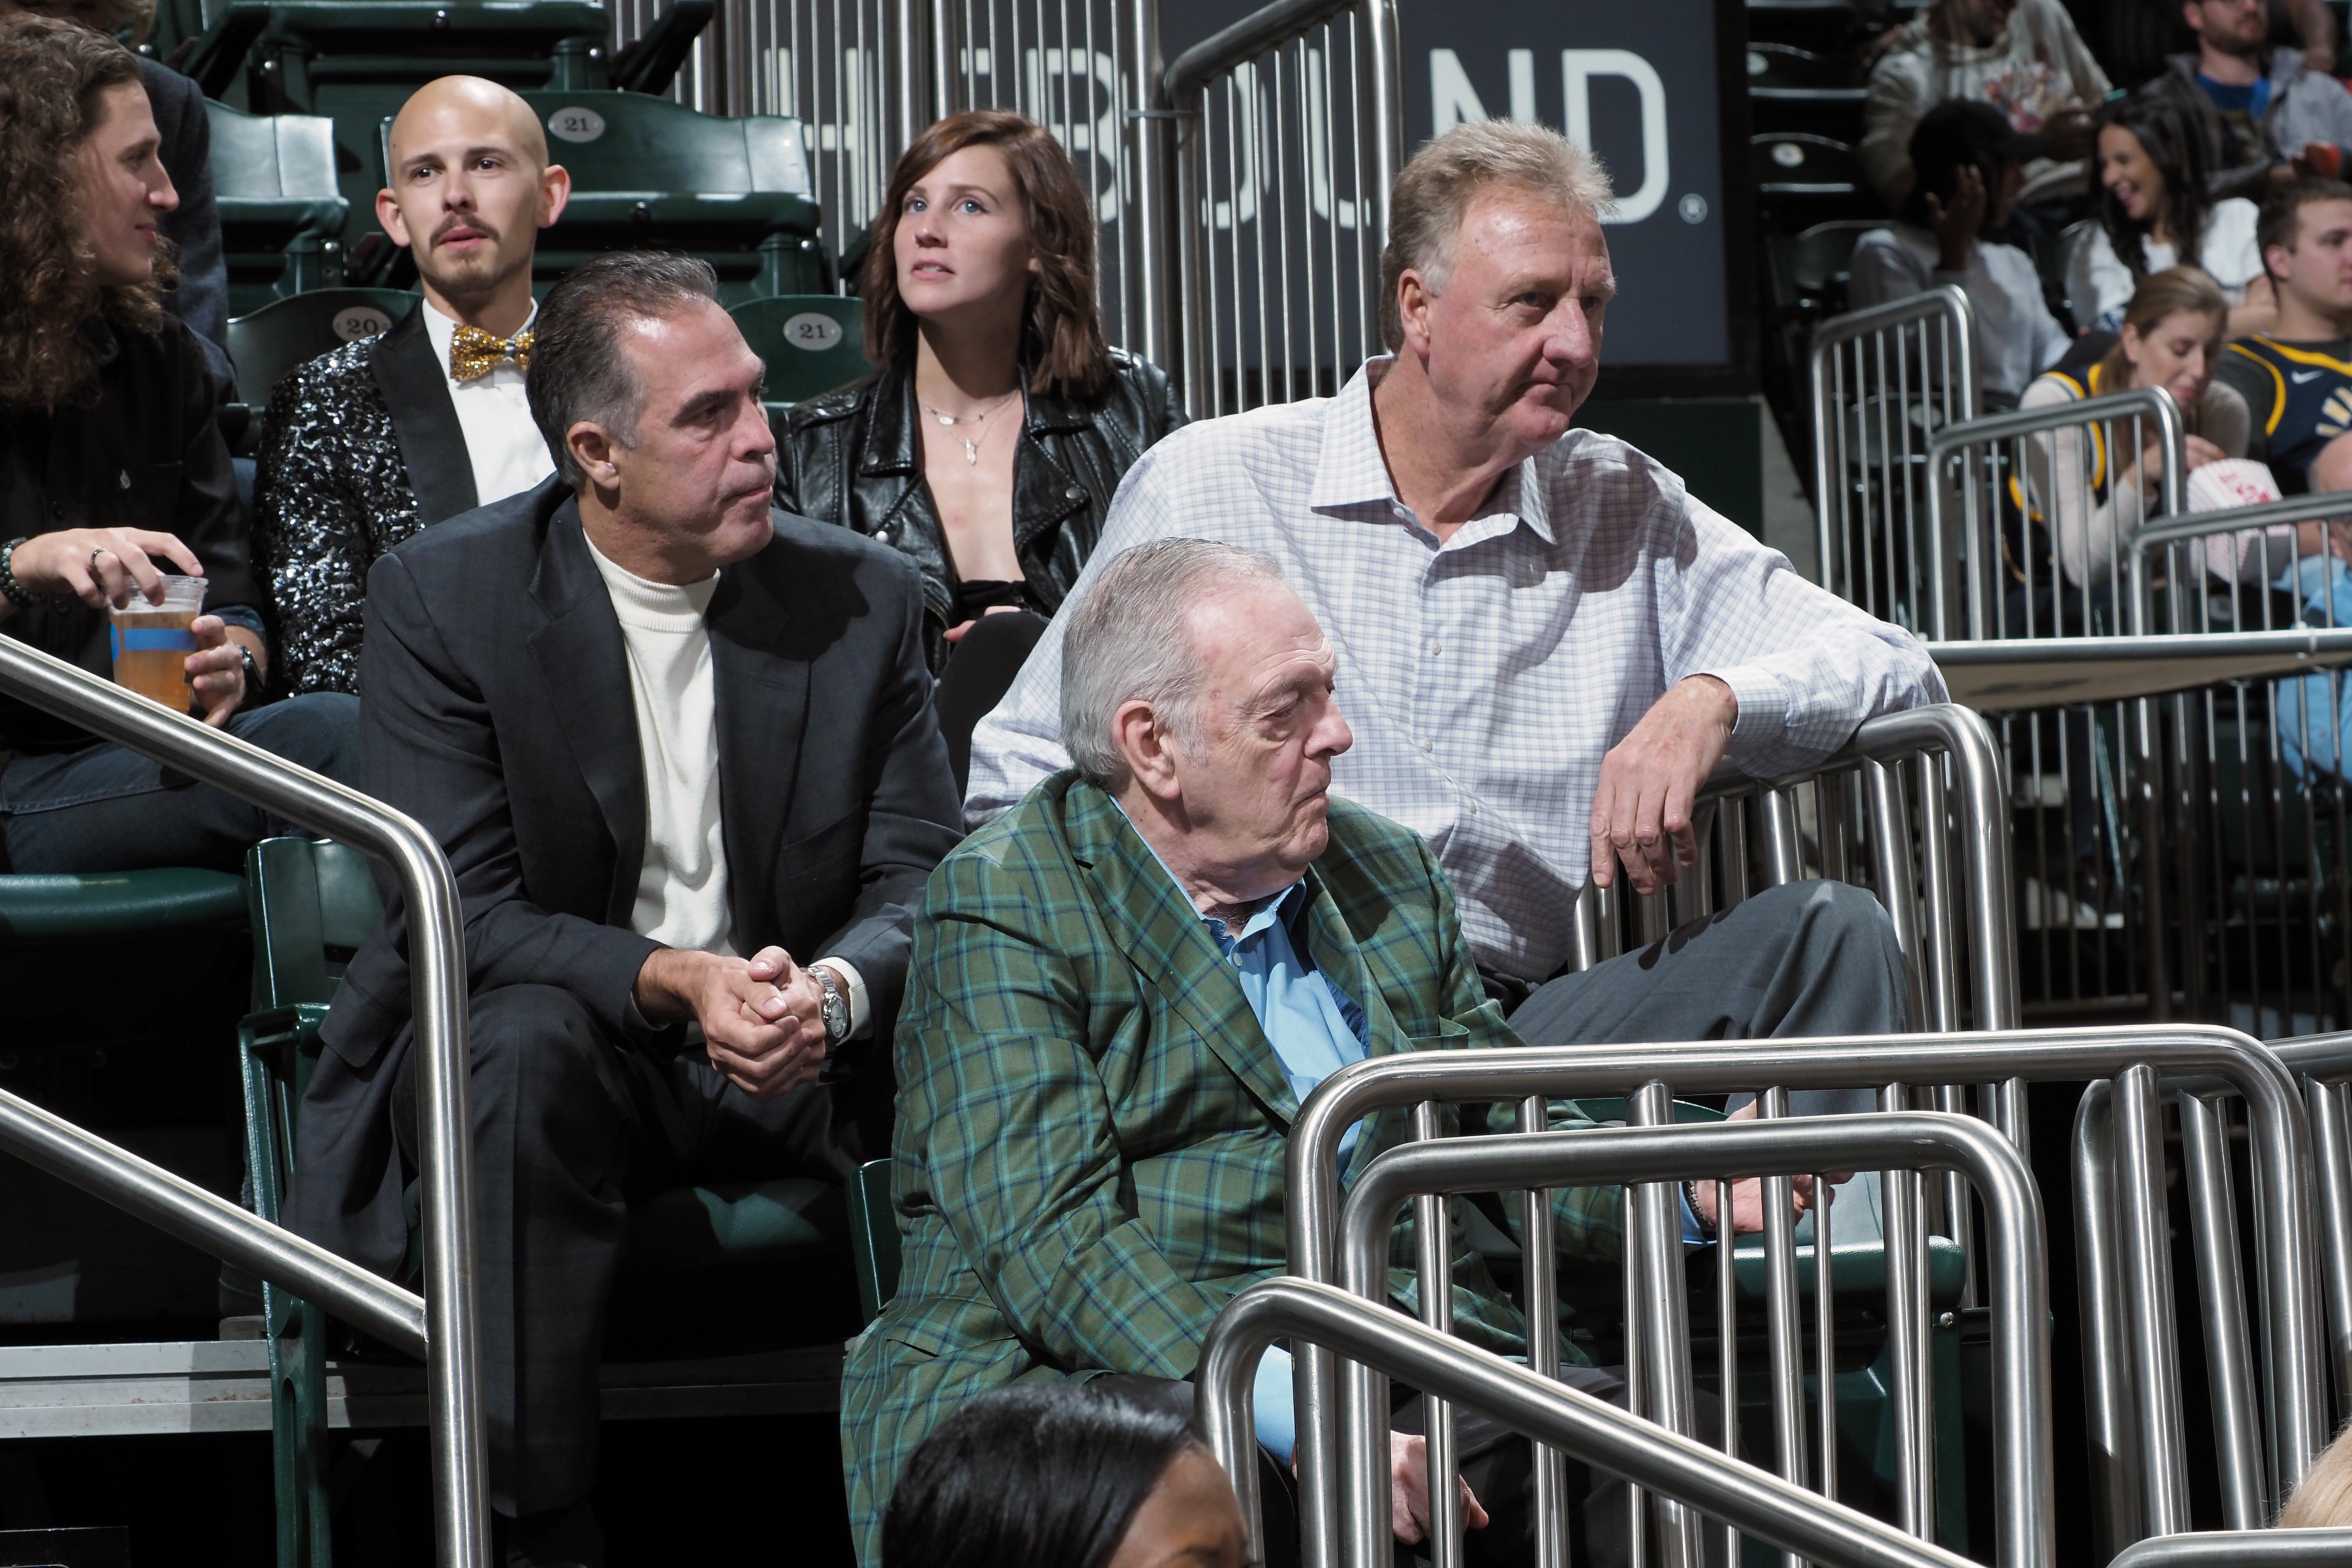 Kevin Pritchard, Larry Bird, and Donnie Walsh watch a game between the Indiana Pacers and Minnesota Timberwolves on October 15, 2019 in Indiana | Source: Getty Images